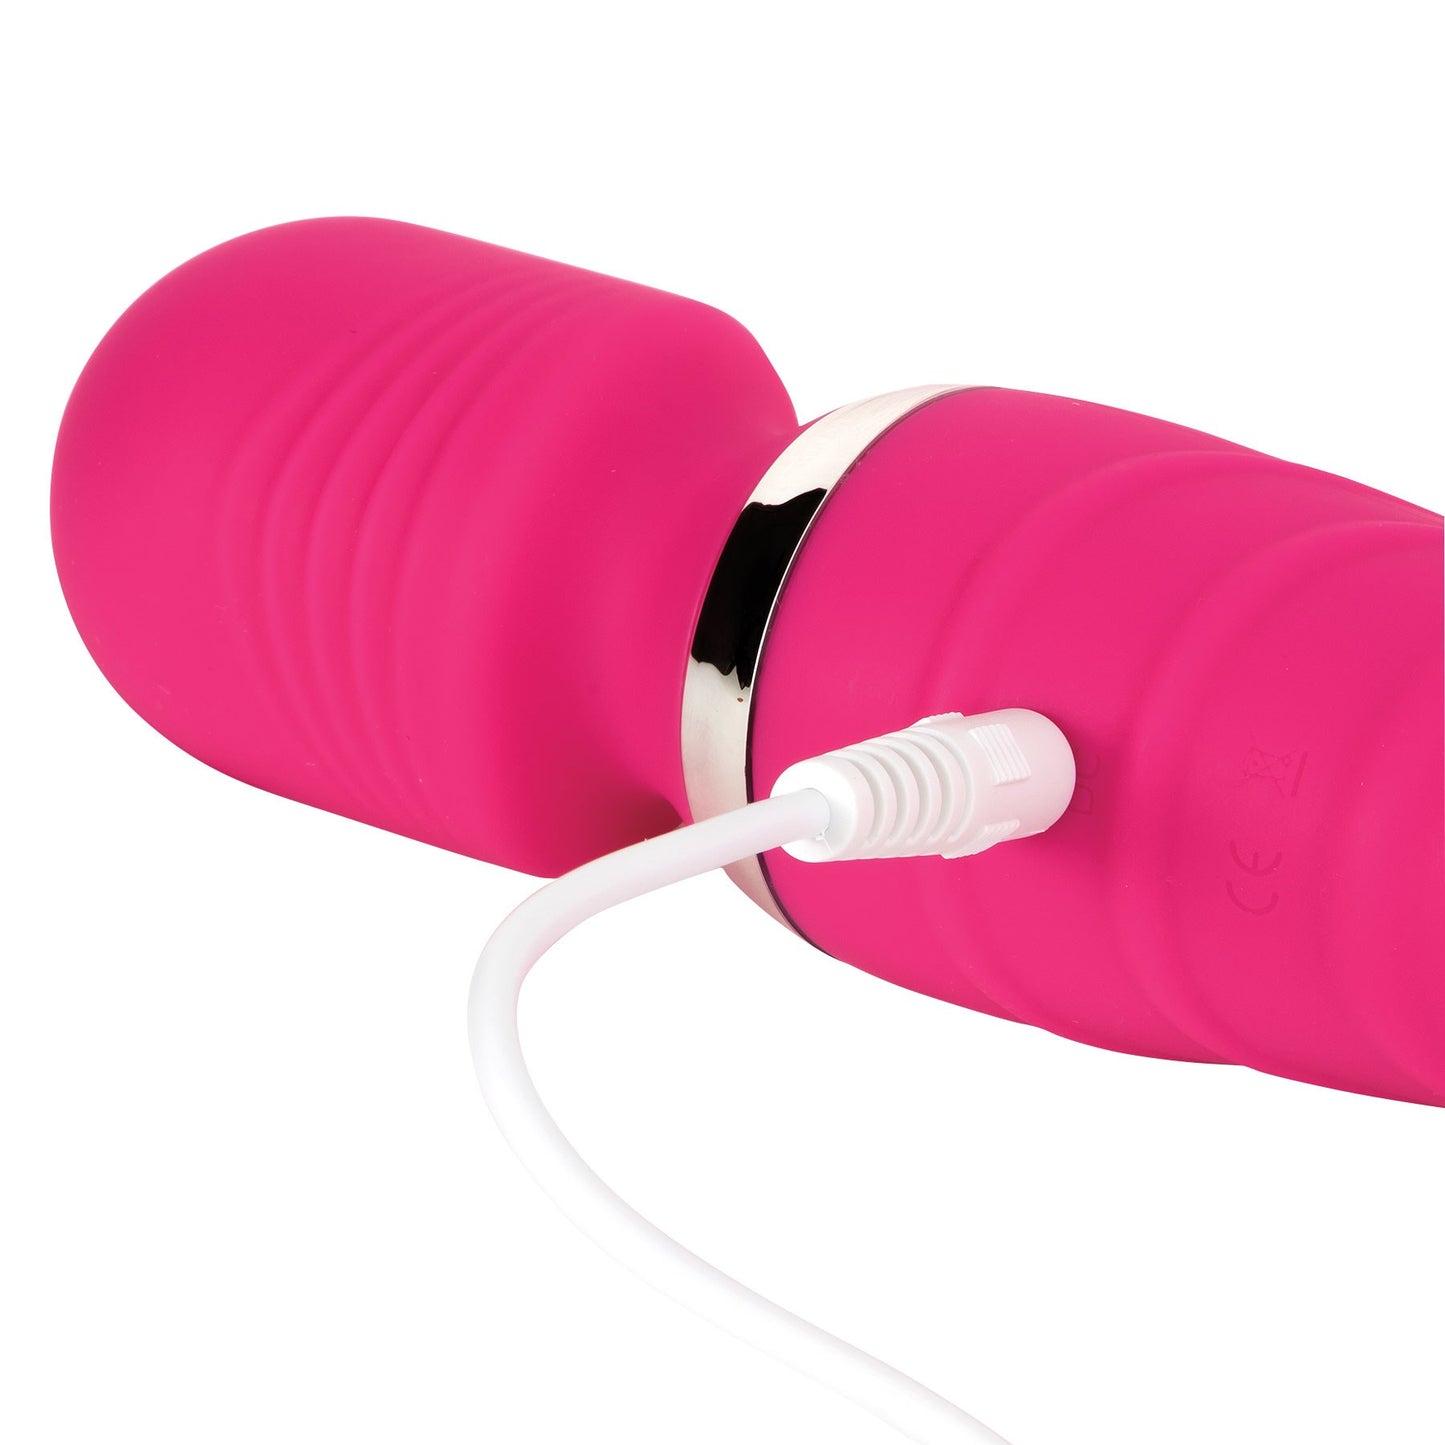 INMI Ultra Thrusting And Vibrating Silicone Wand